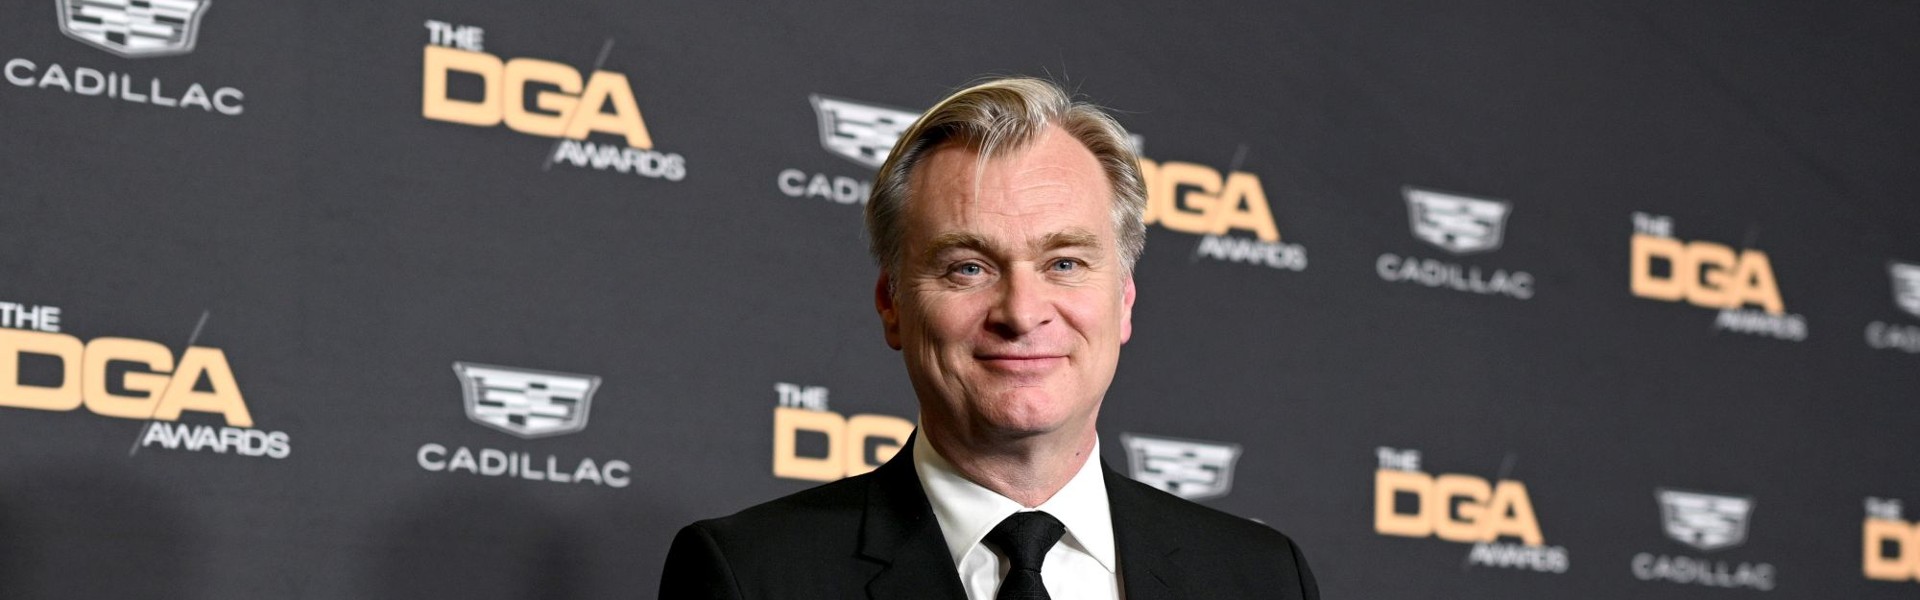 Christopher Nolan director of the year! First time in his career